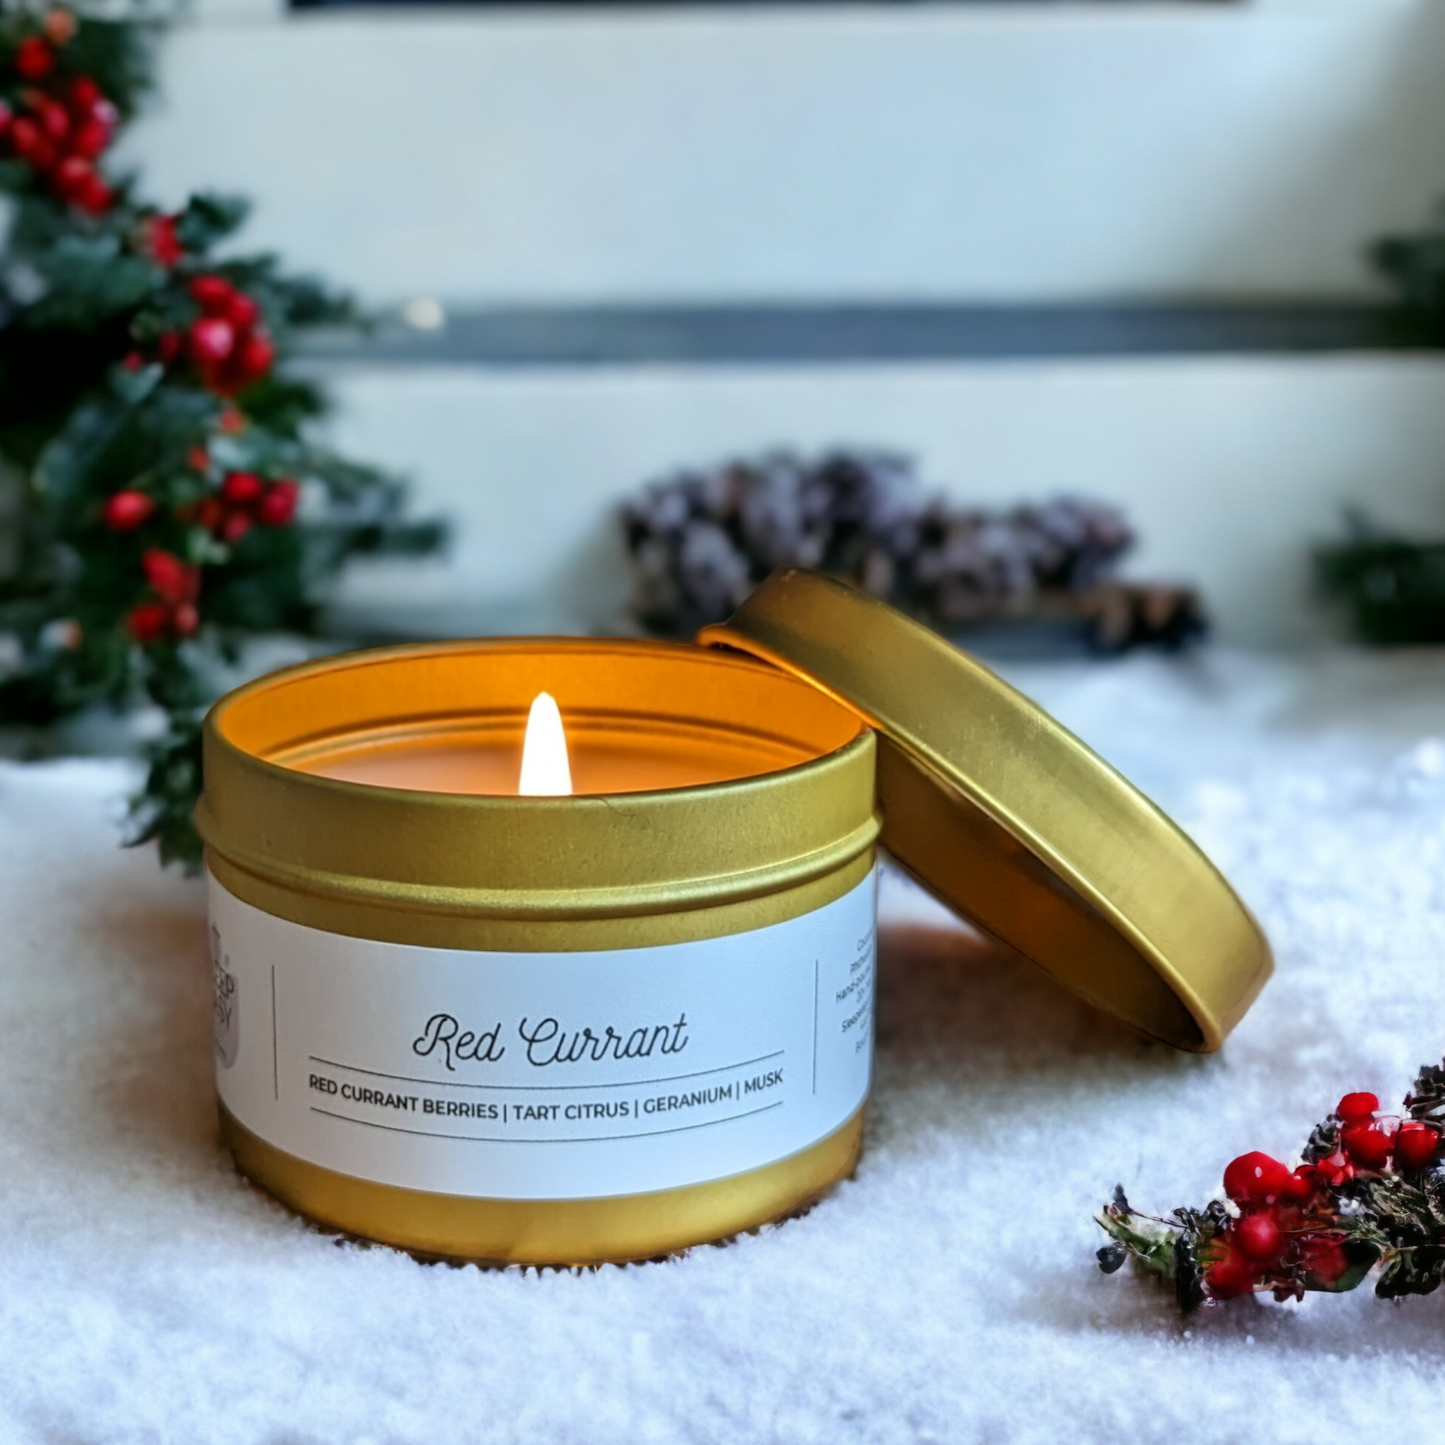 Red Currant - Coconut Soy Candle - To Be Discontinued